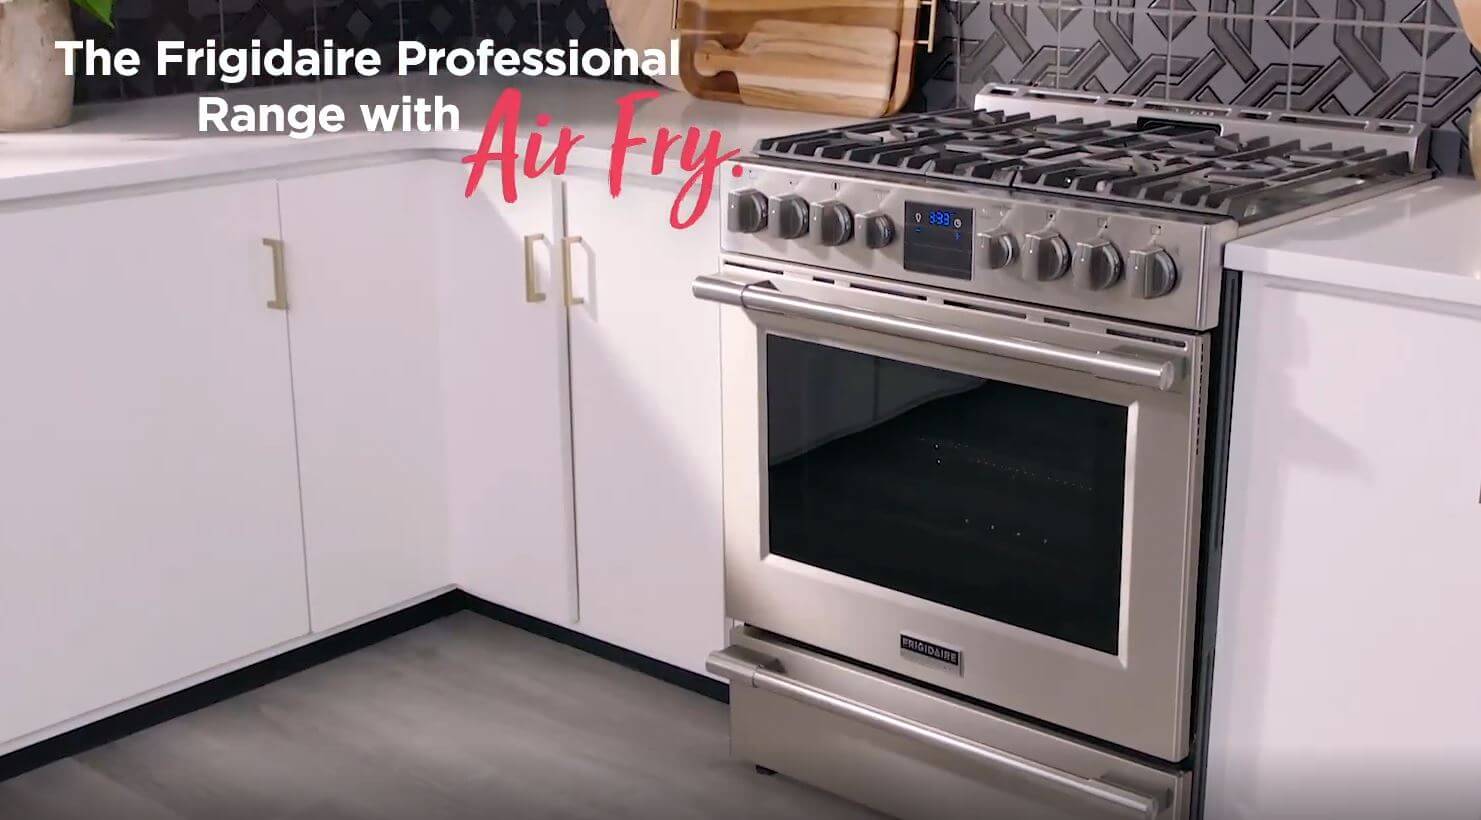 Frigidaire Professional air fry image with oven thumbnail